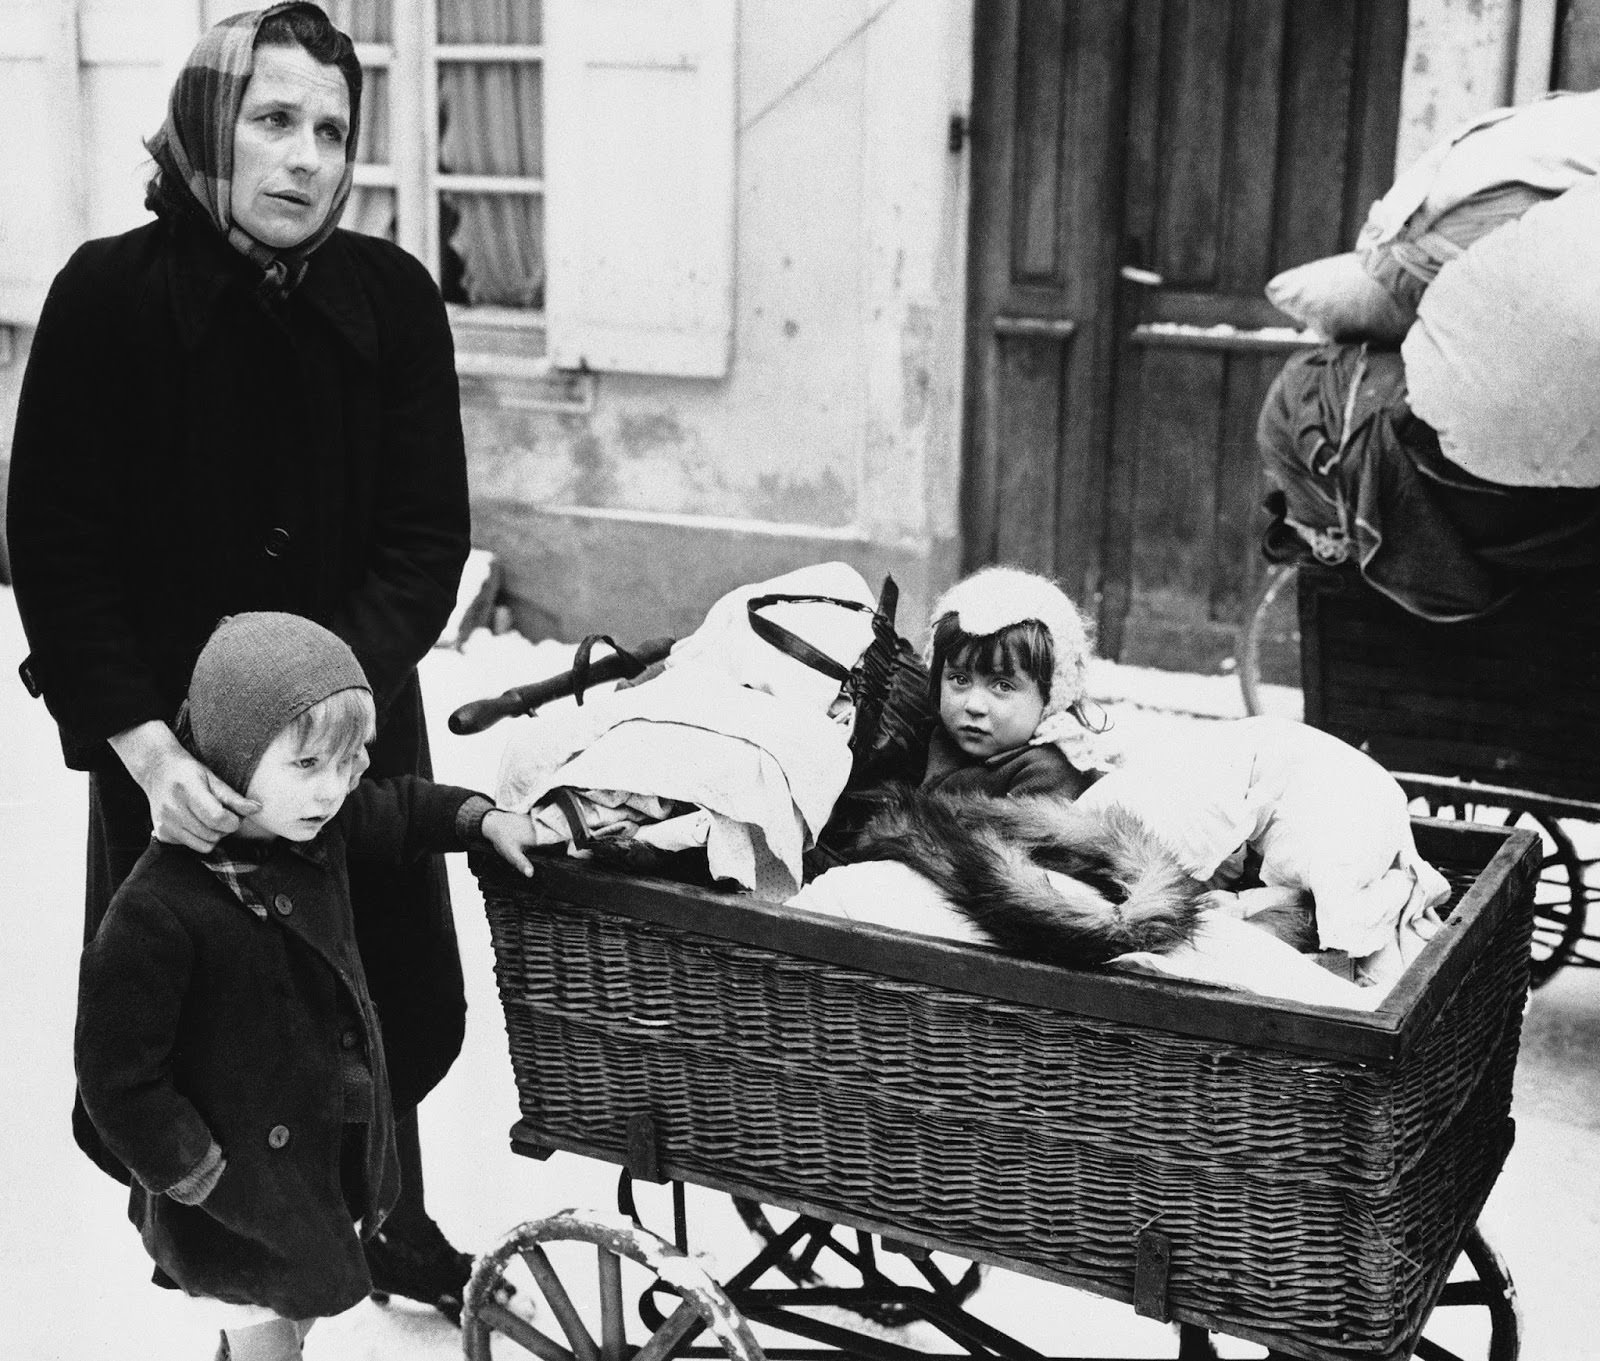 A Frenchwoman with two children and belongings loaded on a baby carriage seen in Haguenau, France on Feb. 20, 1945, before they started on their long trek to a safe rear area. They are some of the refugees leaving the town because of the planned withdrawal of the 7th U.S. Army.